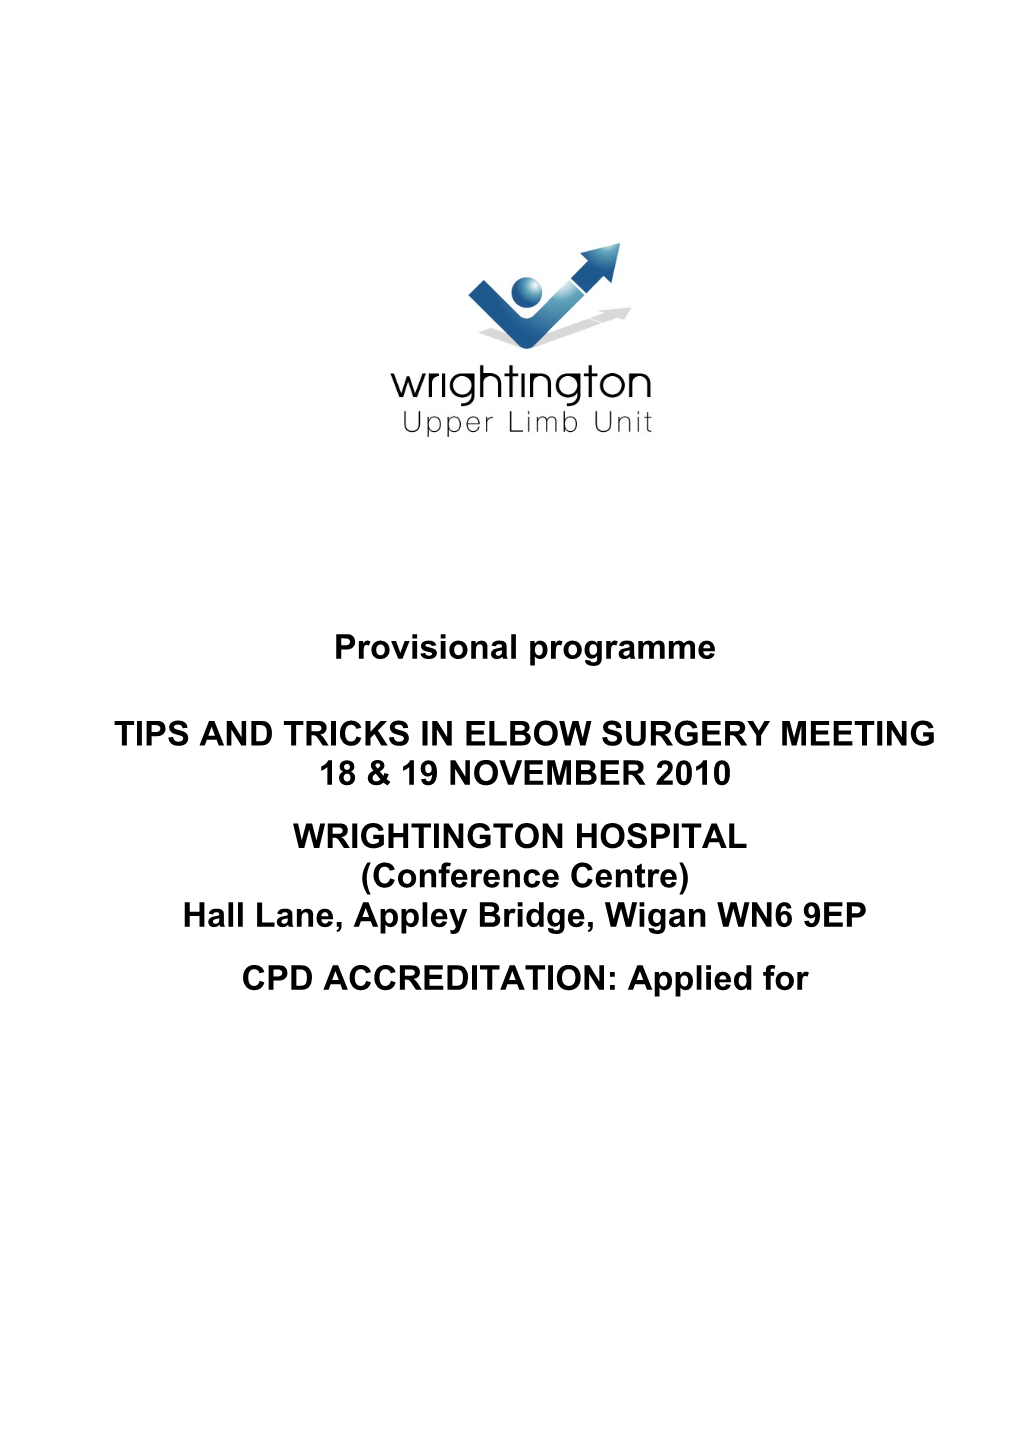 Tips and Tricks in Elbow Surgery Meeting